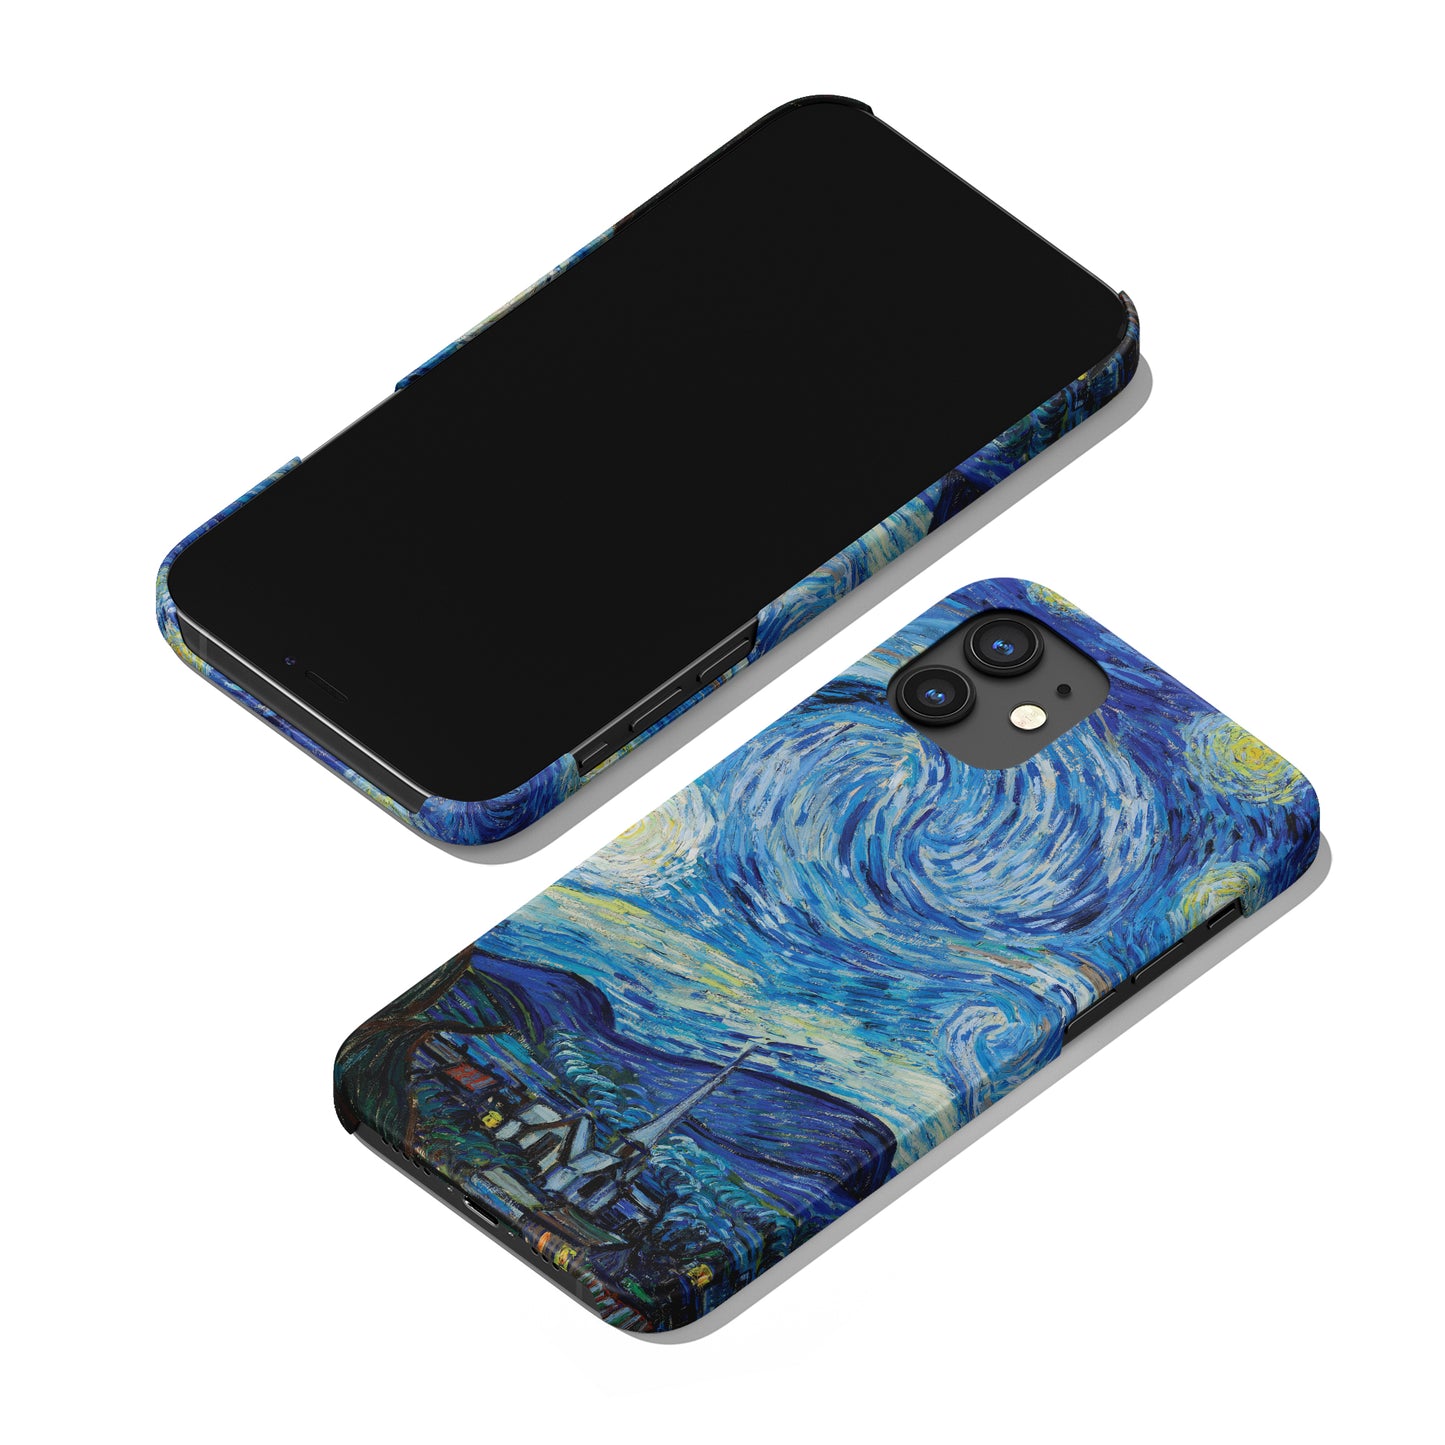 The Starry Night - Vincent Van Gogh iPhone Case